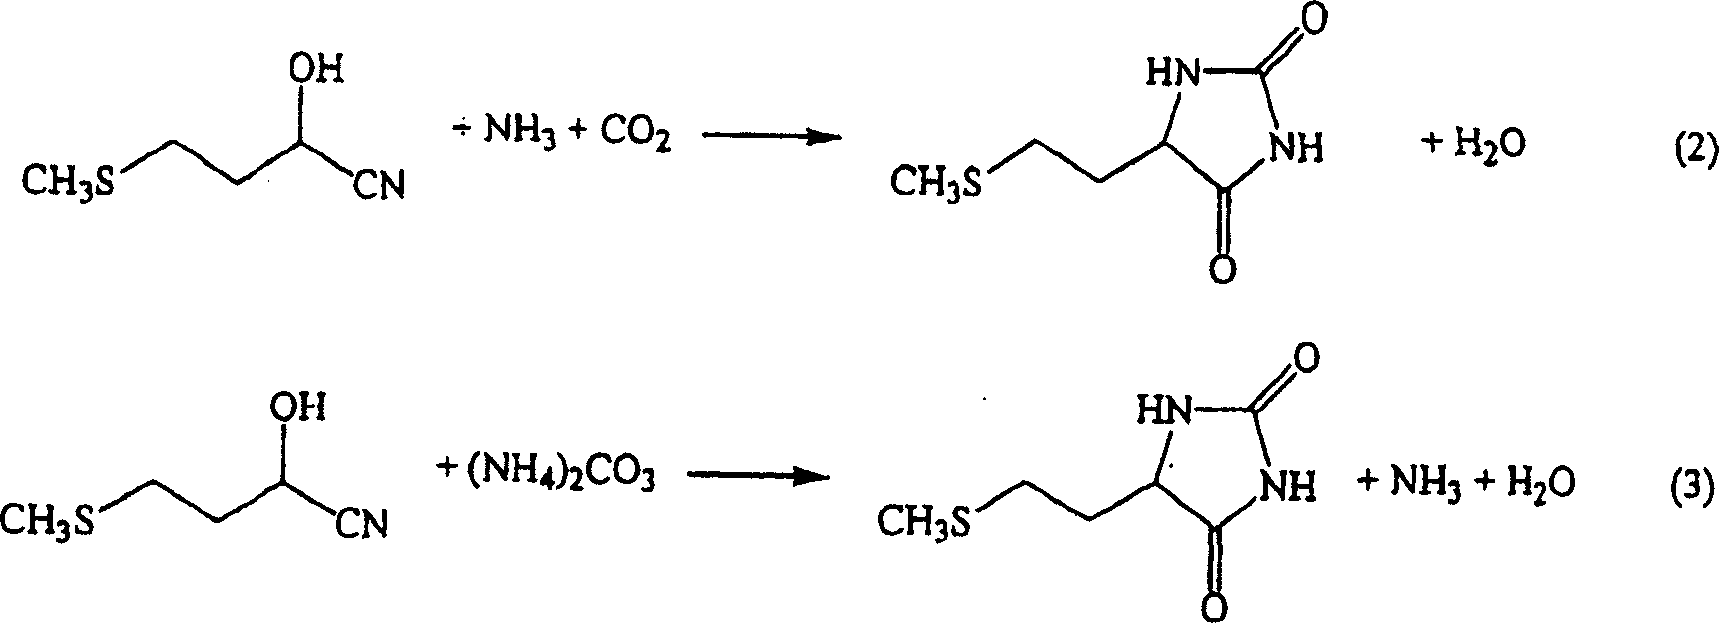 Process for producing methionine